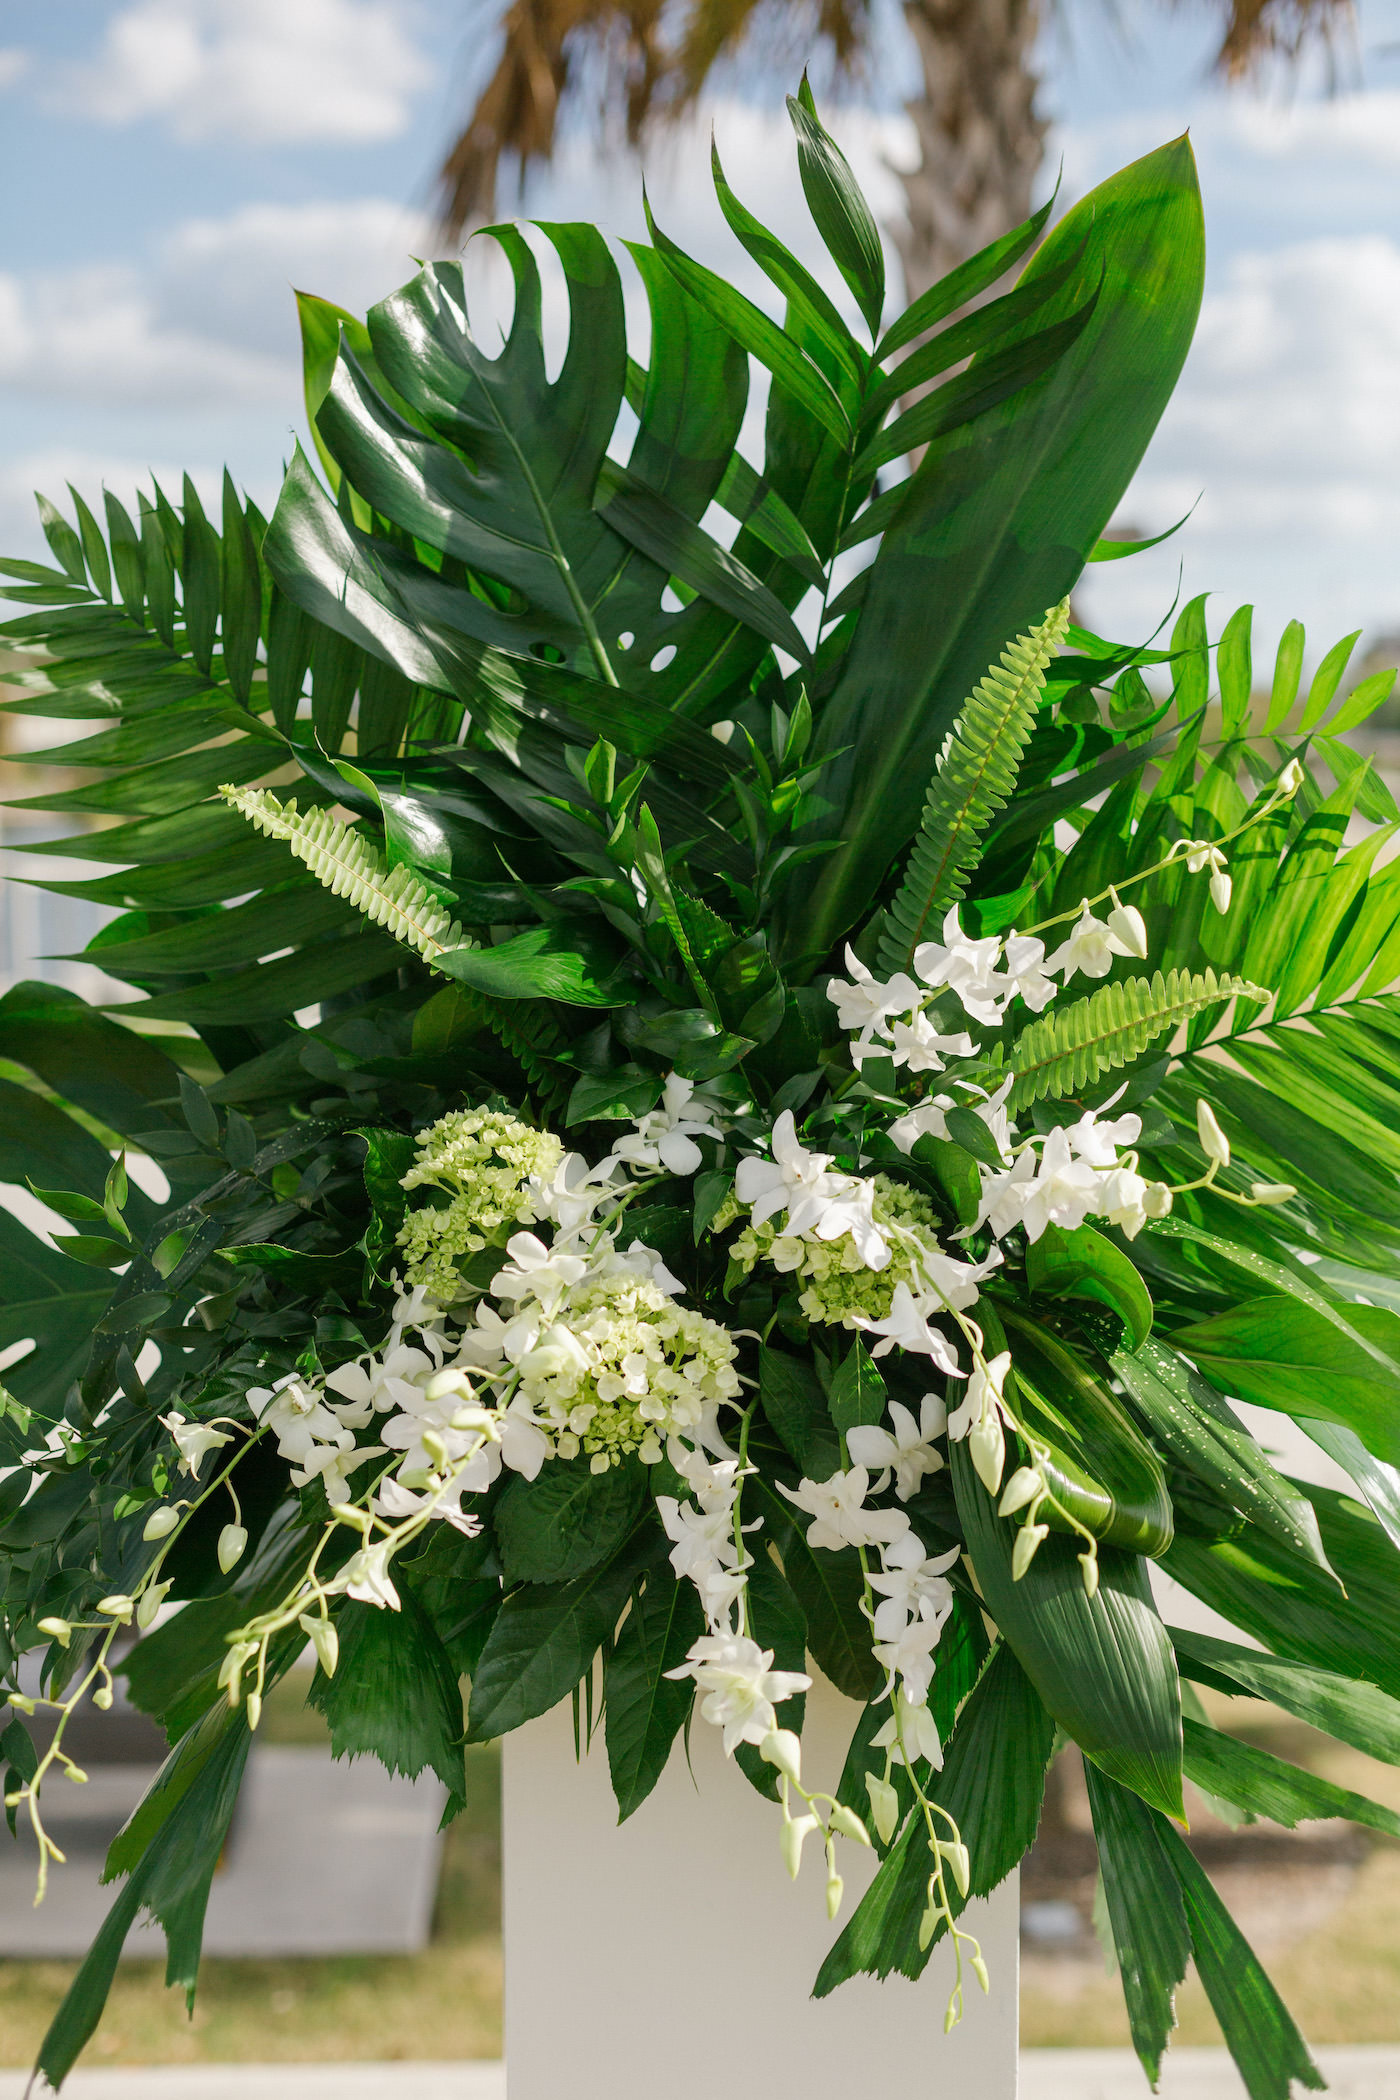 Tampa Wedding Florist Bruce Wayne Florals | Tropical Florida Wedding Ceremony Floral Arrangement with Palm Leaves and Fern Greenery and White Orchids | Tampa Wedding Florist Bruce Wayne Florals